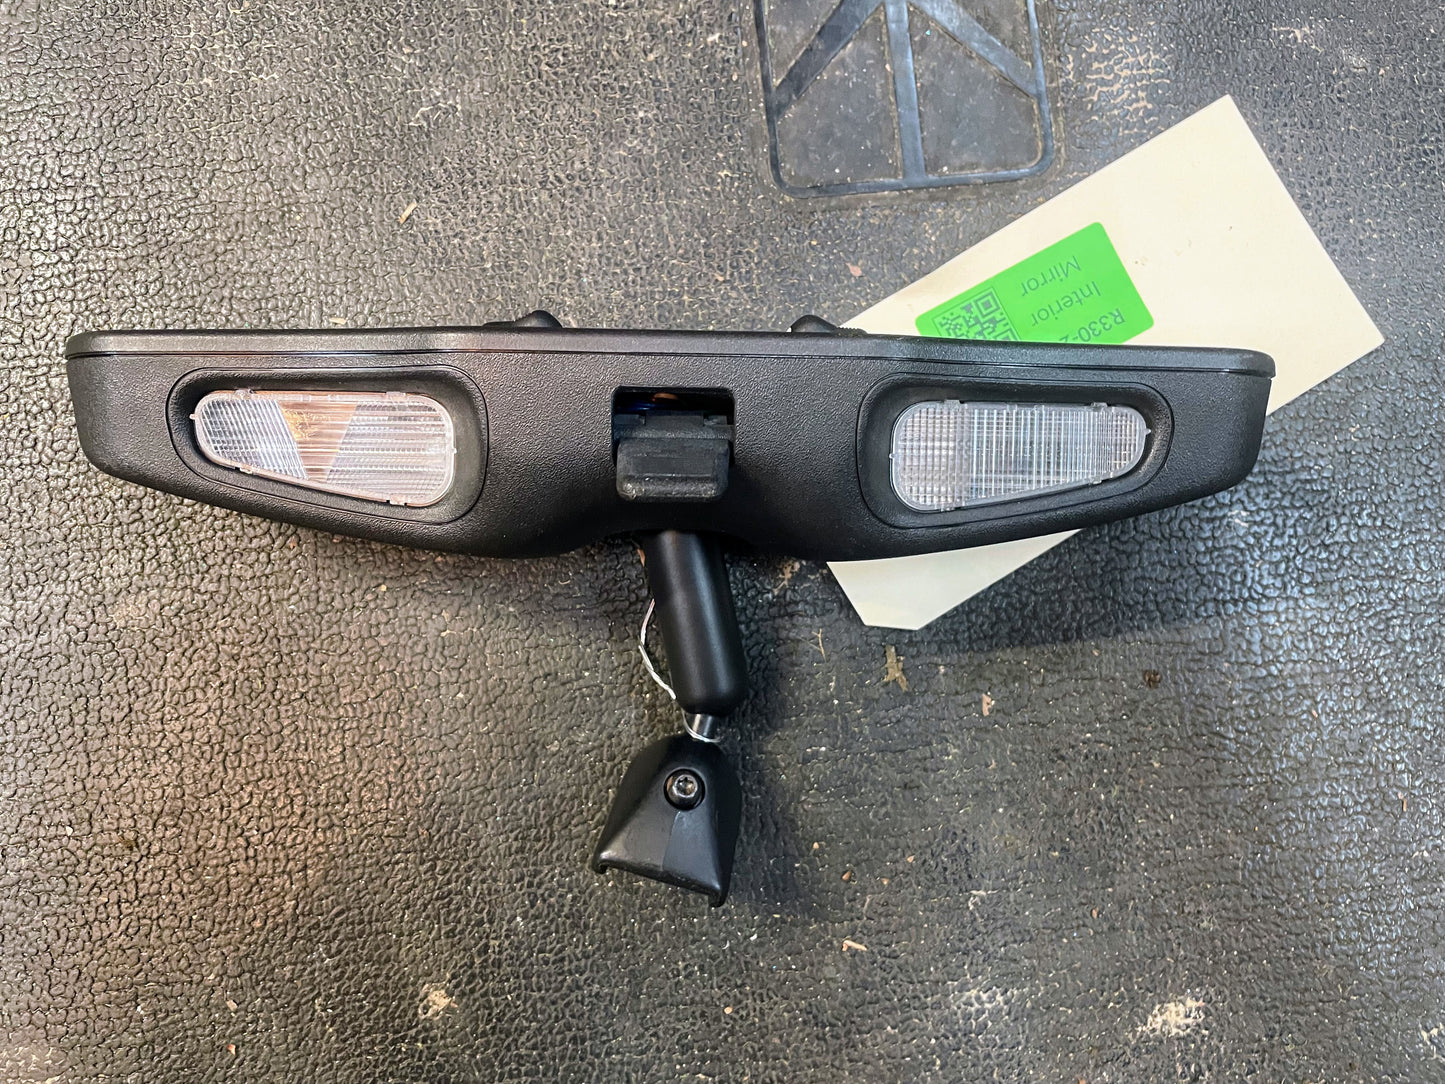 OEM Interior Rear View Mirror with Reading Lamps for 1982-1993 Chevy S10, Blazer, and more